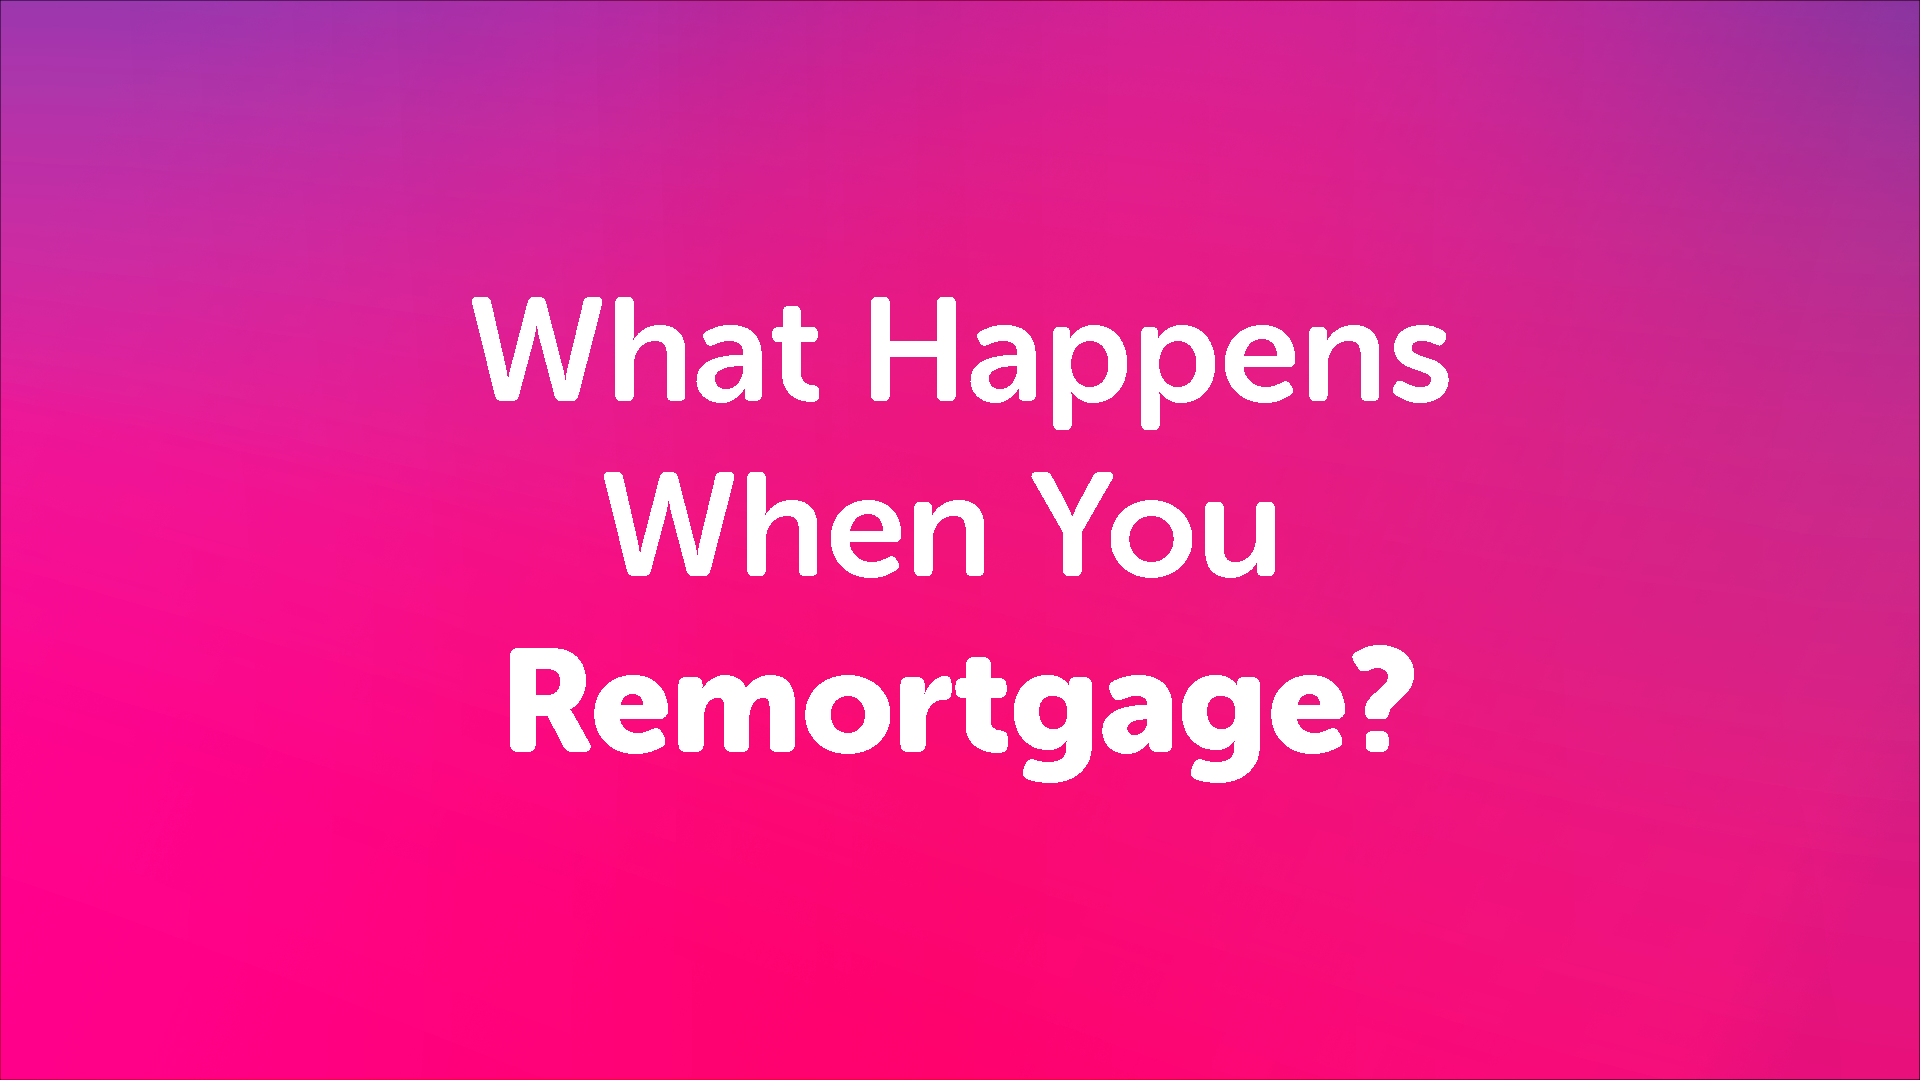 What happens when you remortgage in Middlesbrough? | Middlesbroughmoneyman